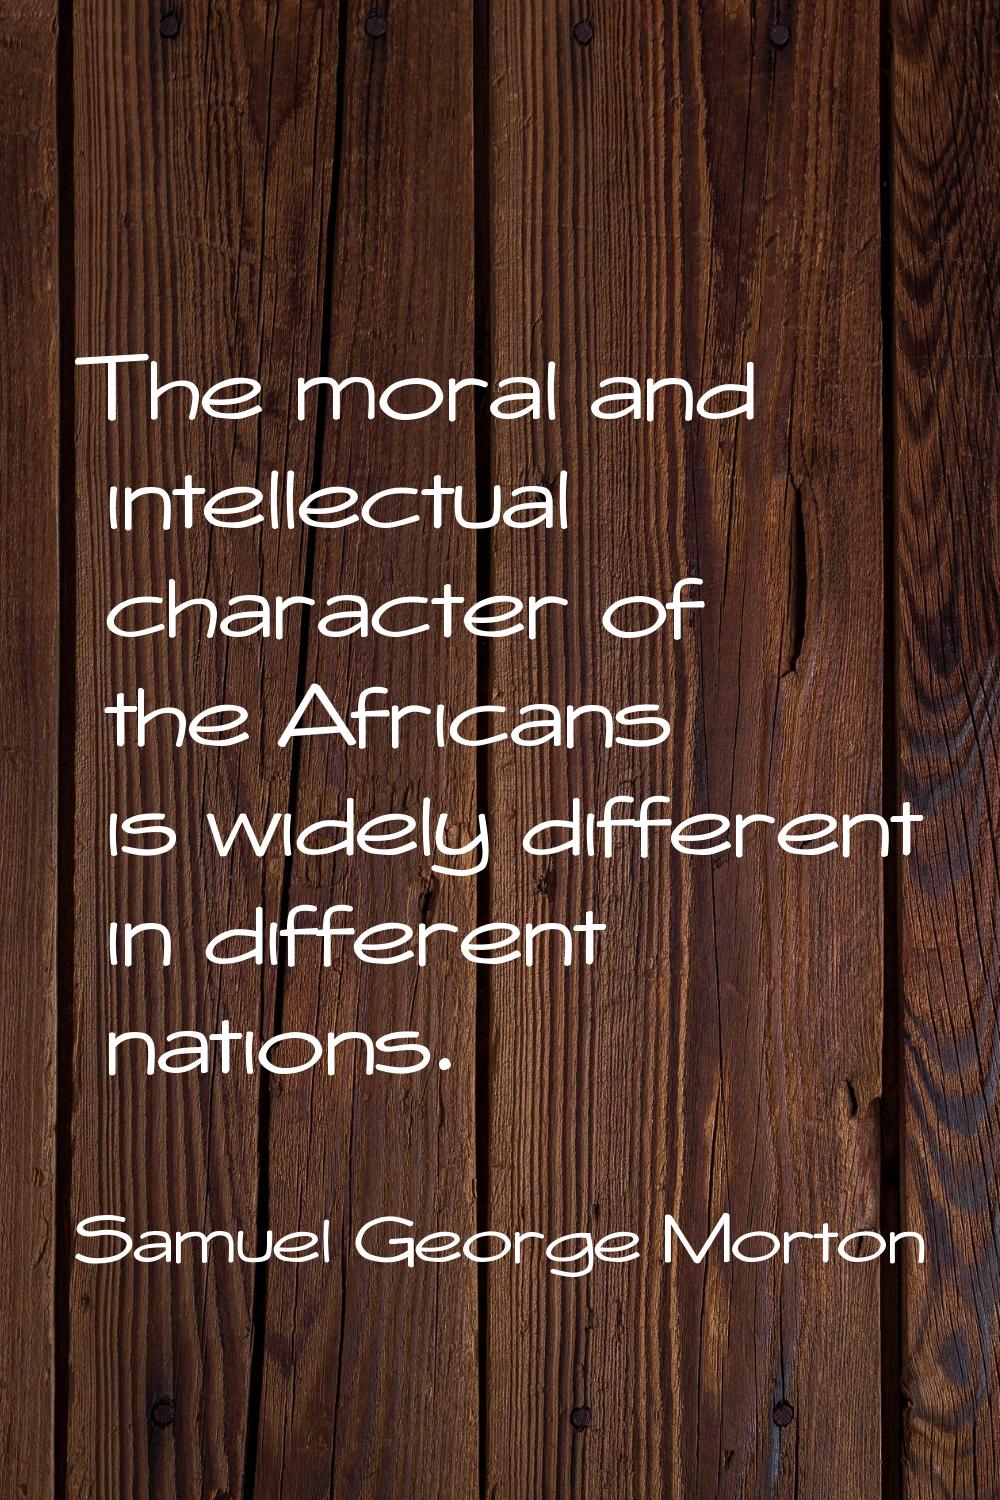 The moral and intellectual character of the Africans is widely different in different nations.